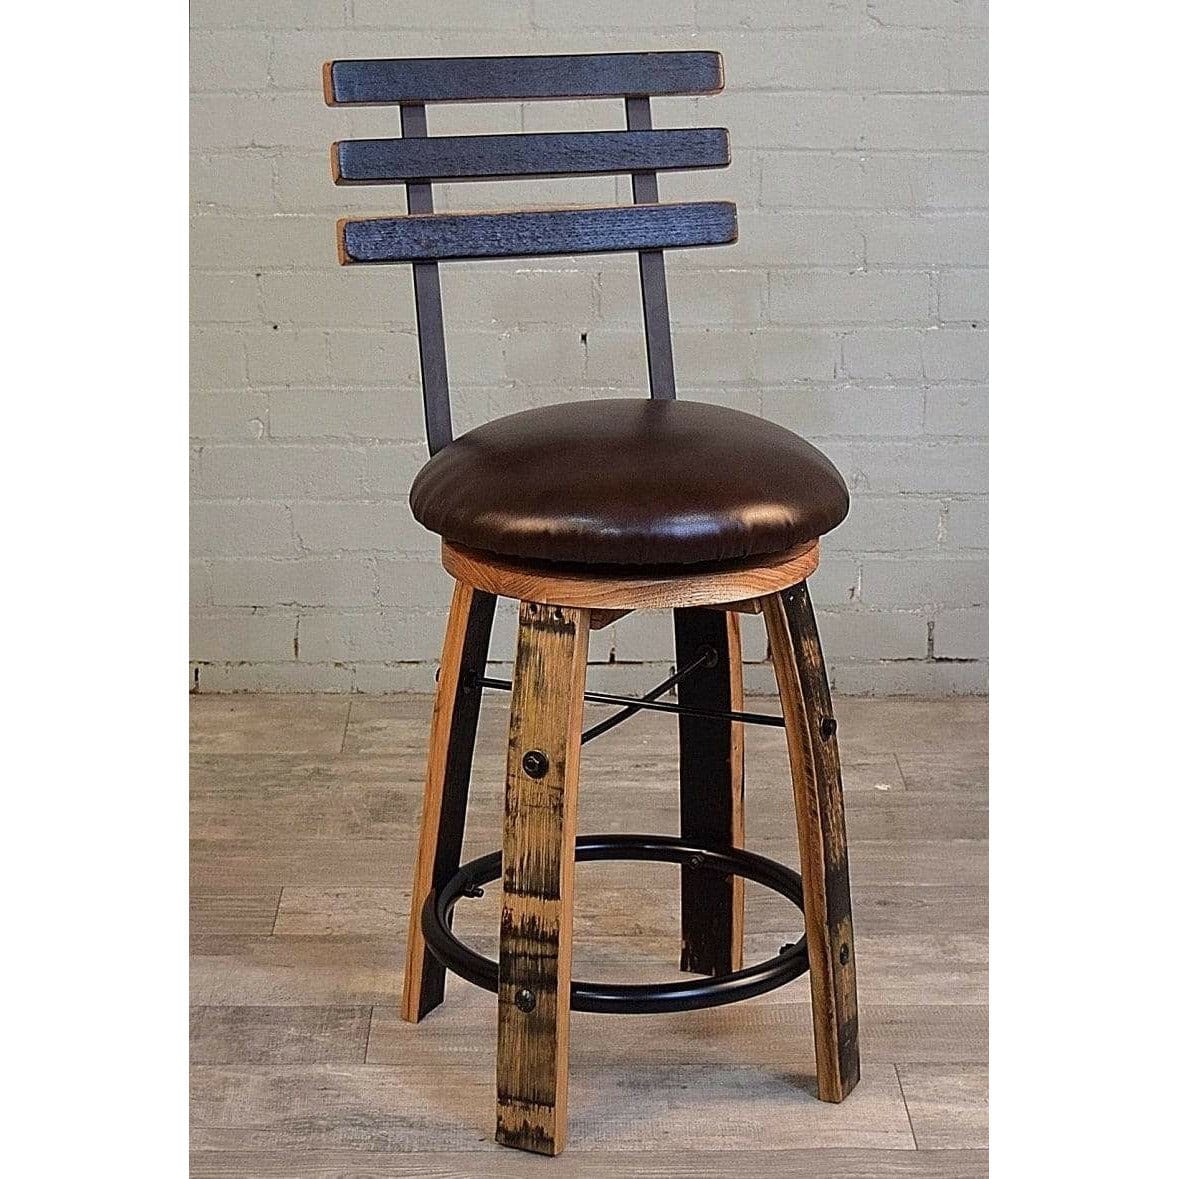 WILLIAM Sheppee USA Counter Stool Counter Stool 26 Inches William Sheppee Shooter's Whiskey Barrel Upholstered Swivel Counter/ Bar Stool w/Back- SHO111